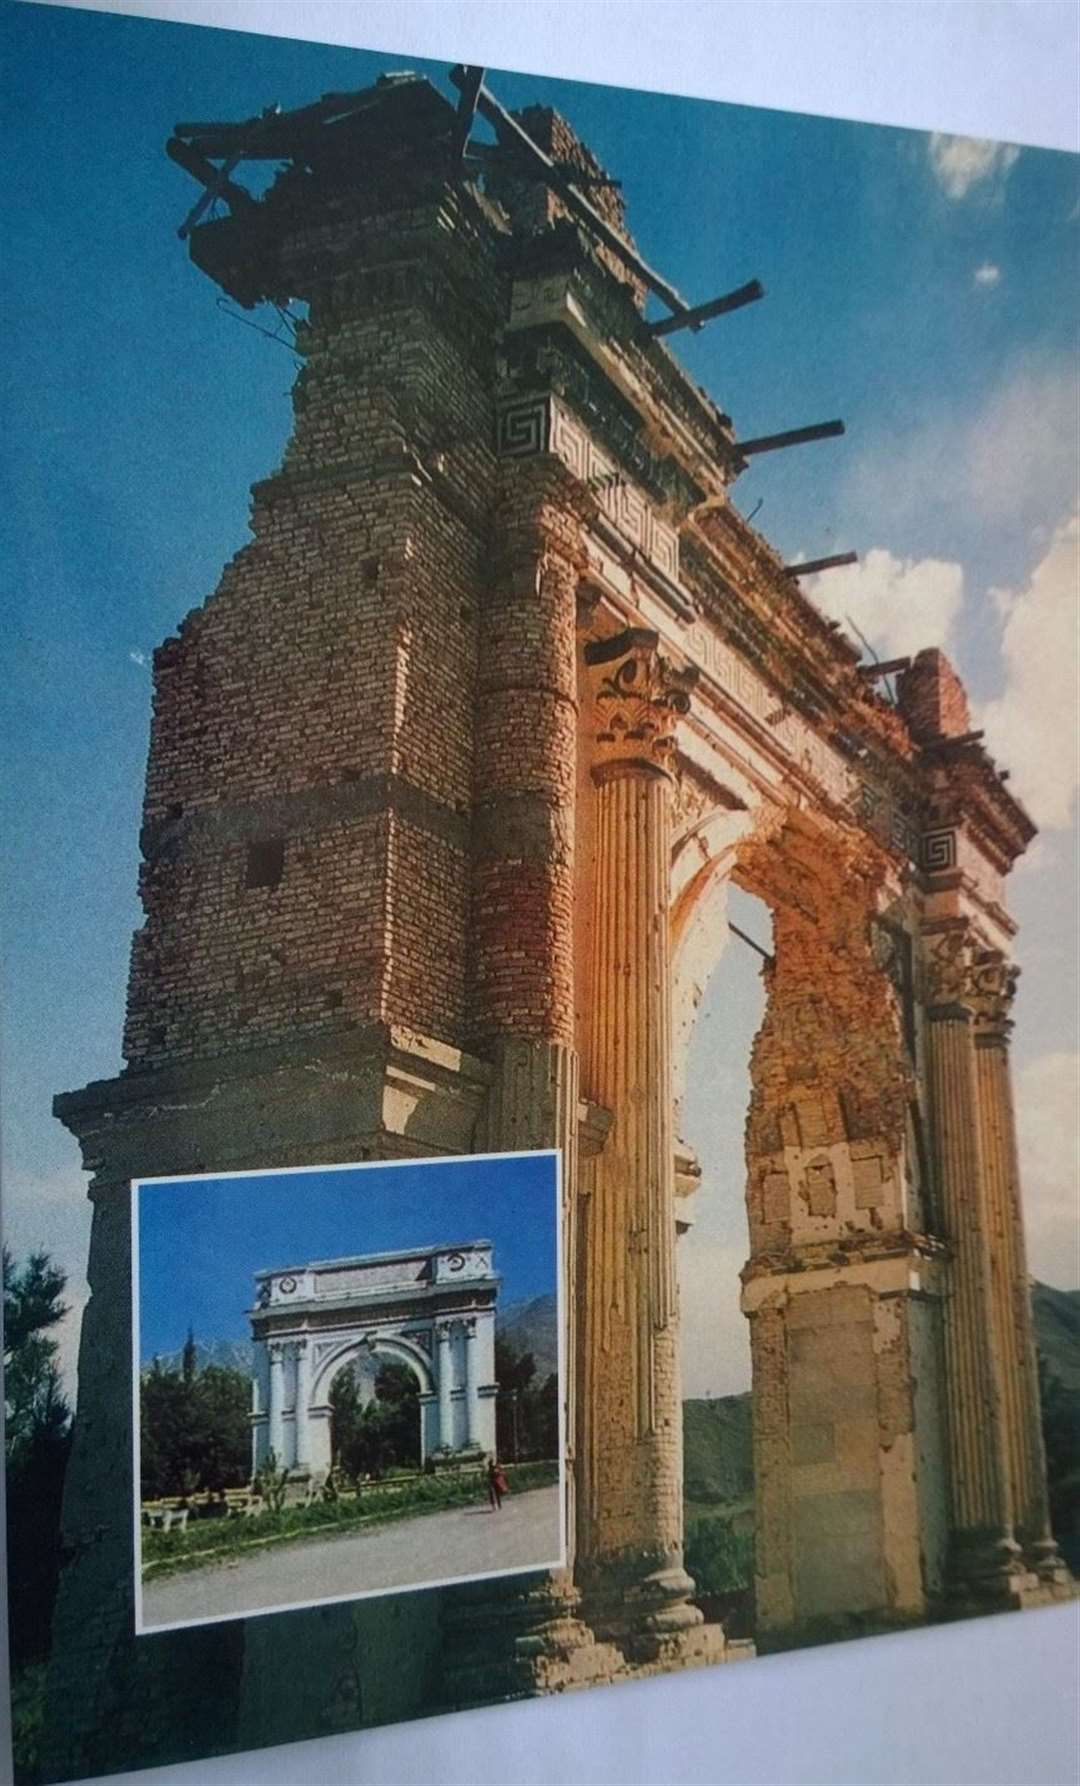 The Paghman Victory Arch - and inset, how it used to look